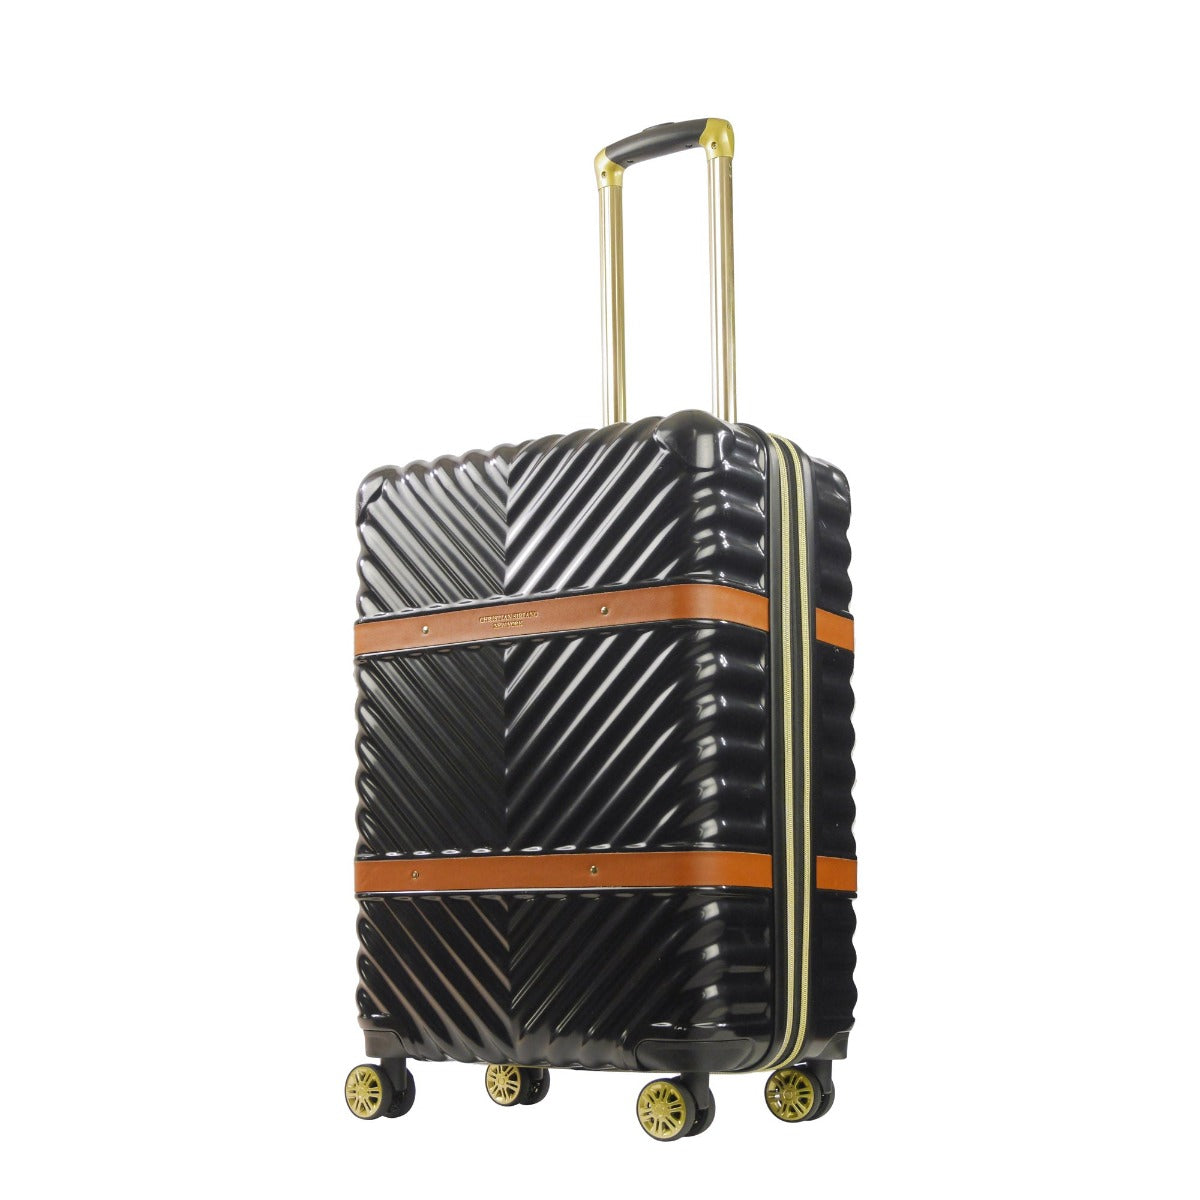 Christian Siriano New York Stella 25" hardside spinner suitcase checked luggage black - best durable suitcases for travel